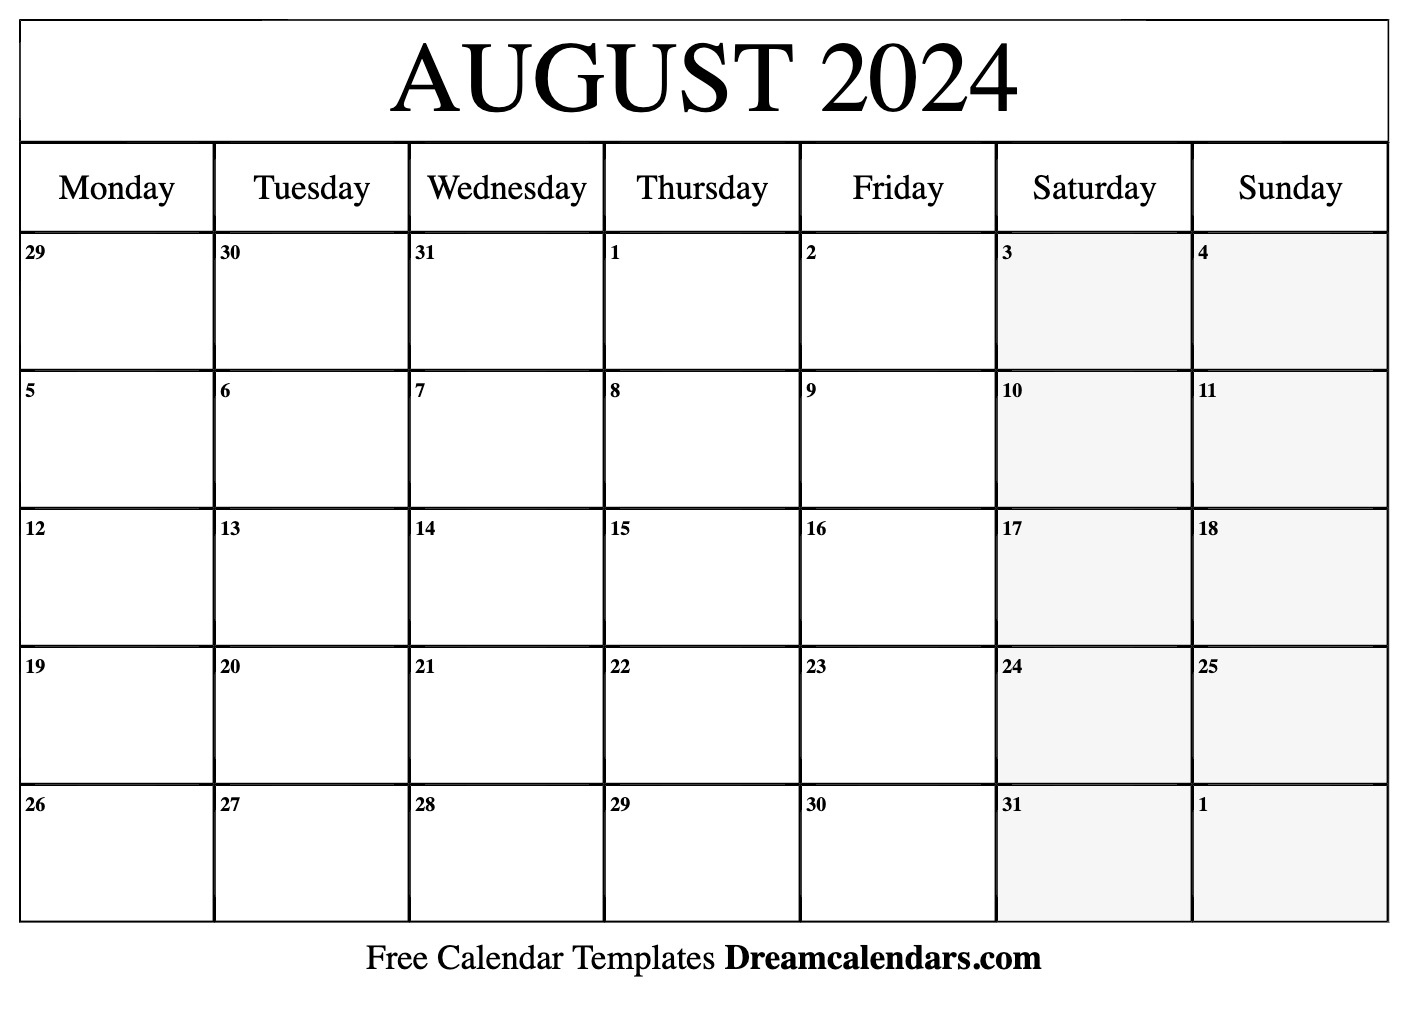 August 2024 Calendar | Free Blank Printable With Holidays | Printable Calendar 2024 August